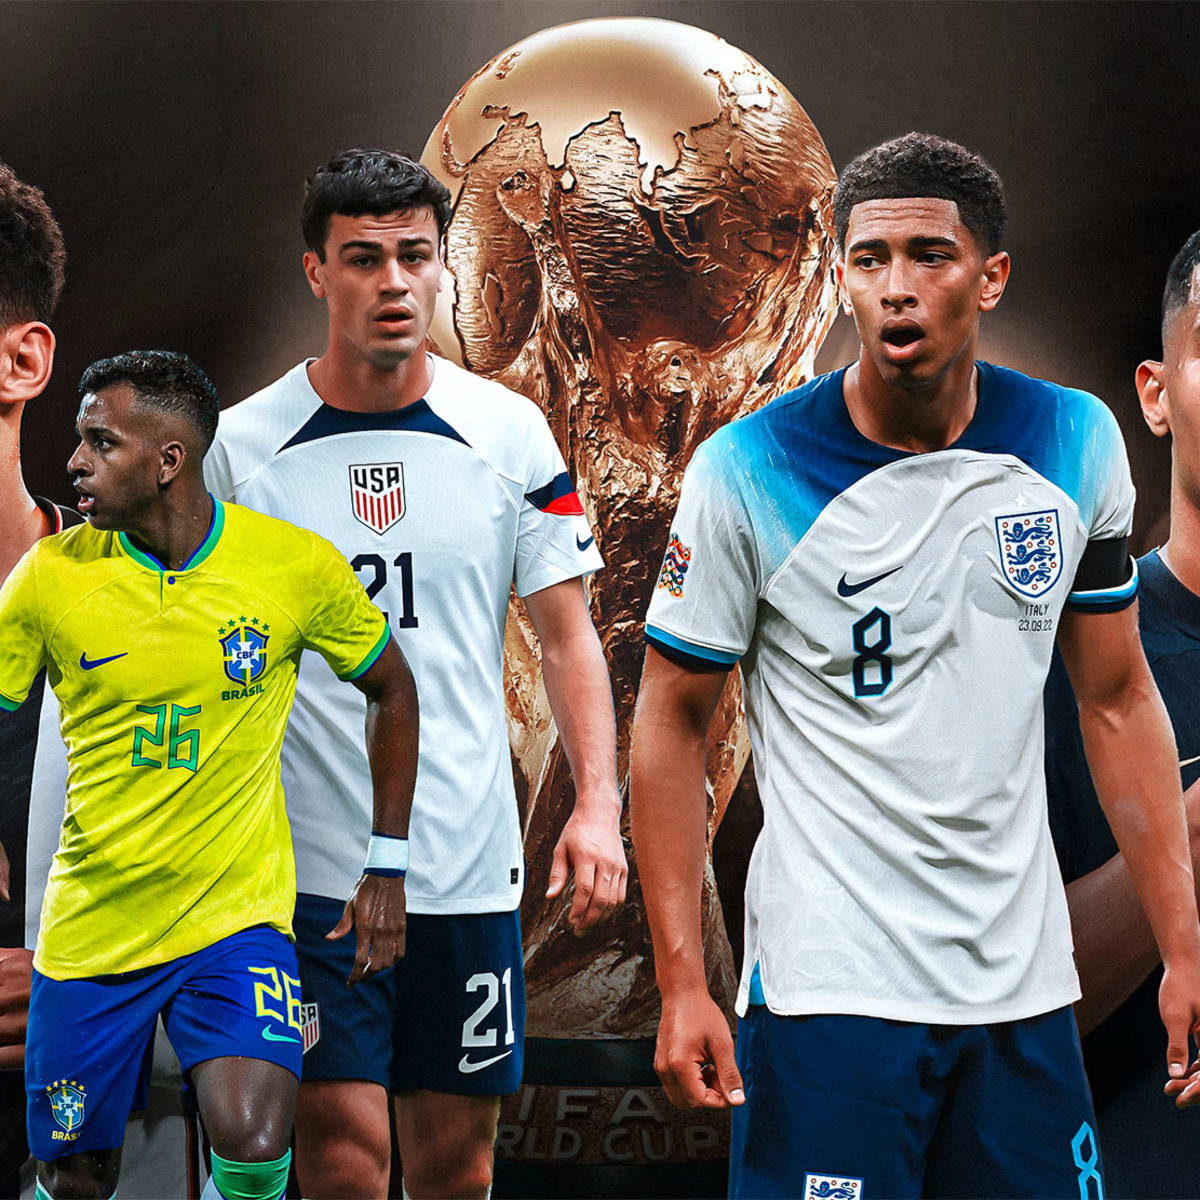 Here is our World Cup 2022 jersey ranking